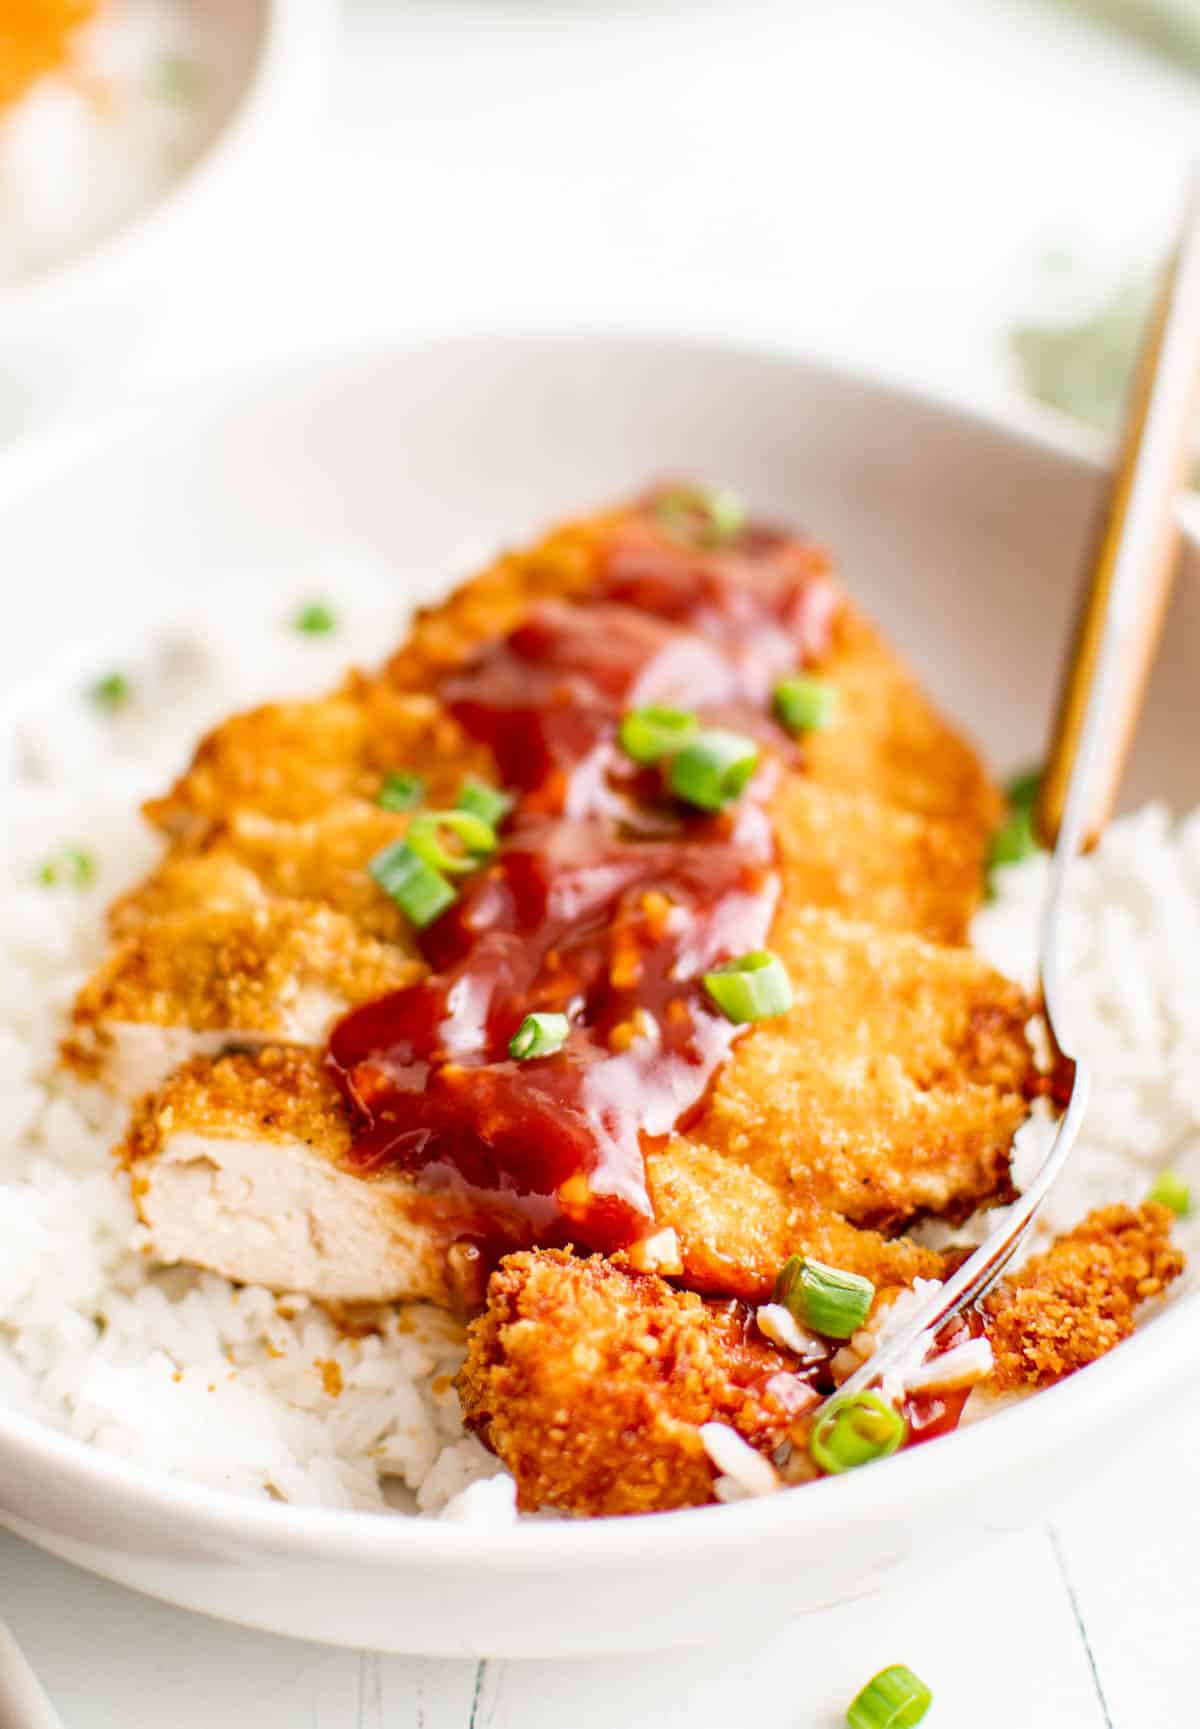 Bowl of rice with the Chicken Katsu Recipe on top with sauce and green onions.